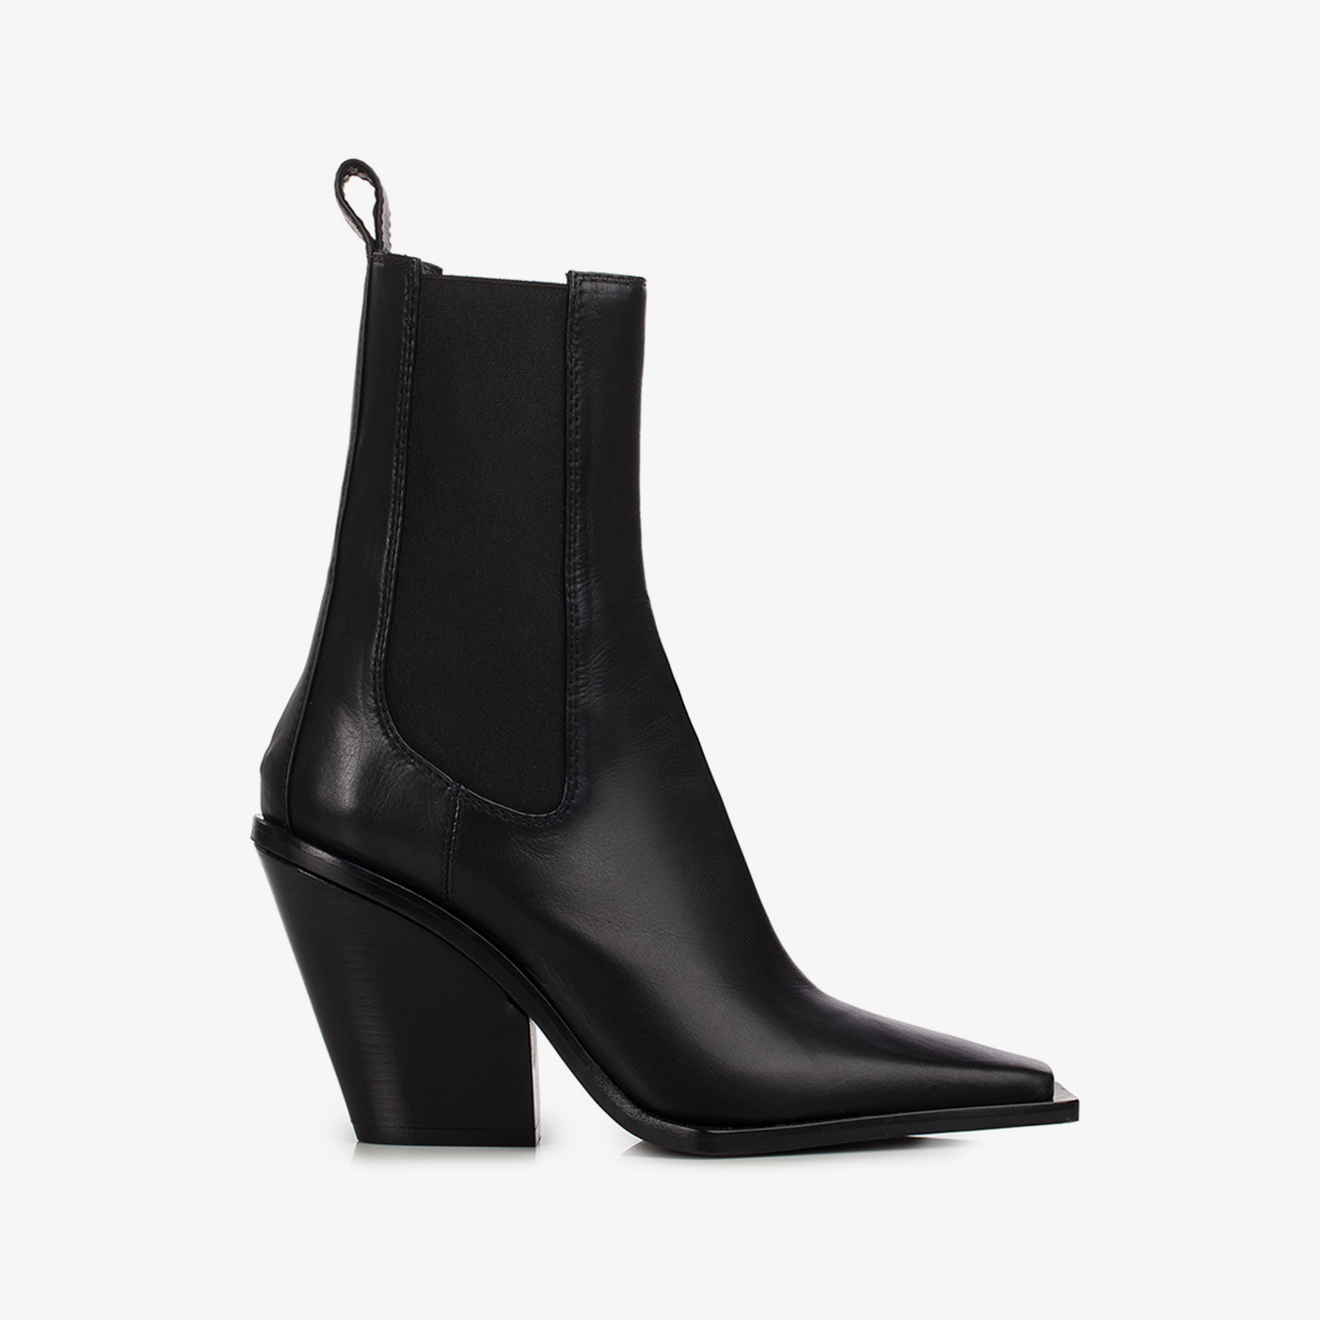 TECHNO ANKLE BOOT 90 mm - Le Silla official outlet